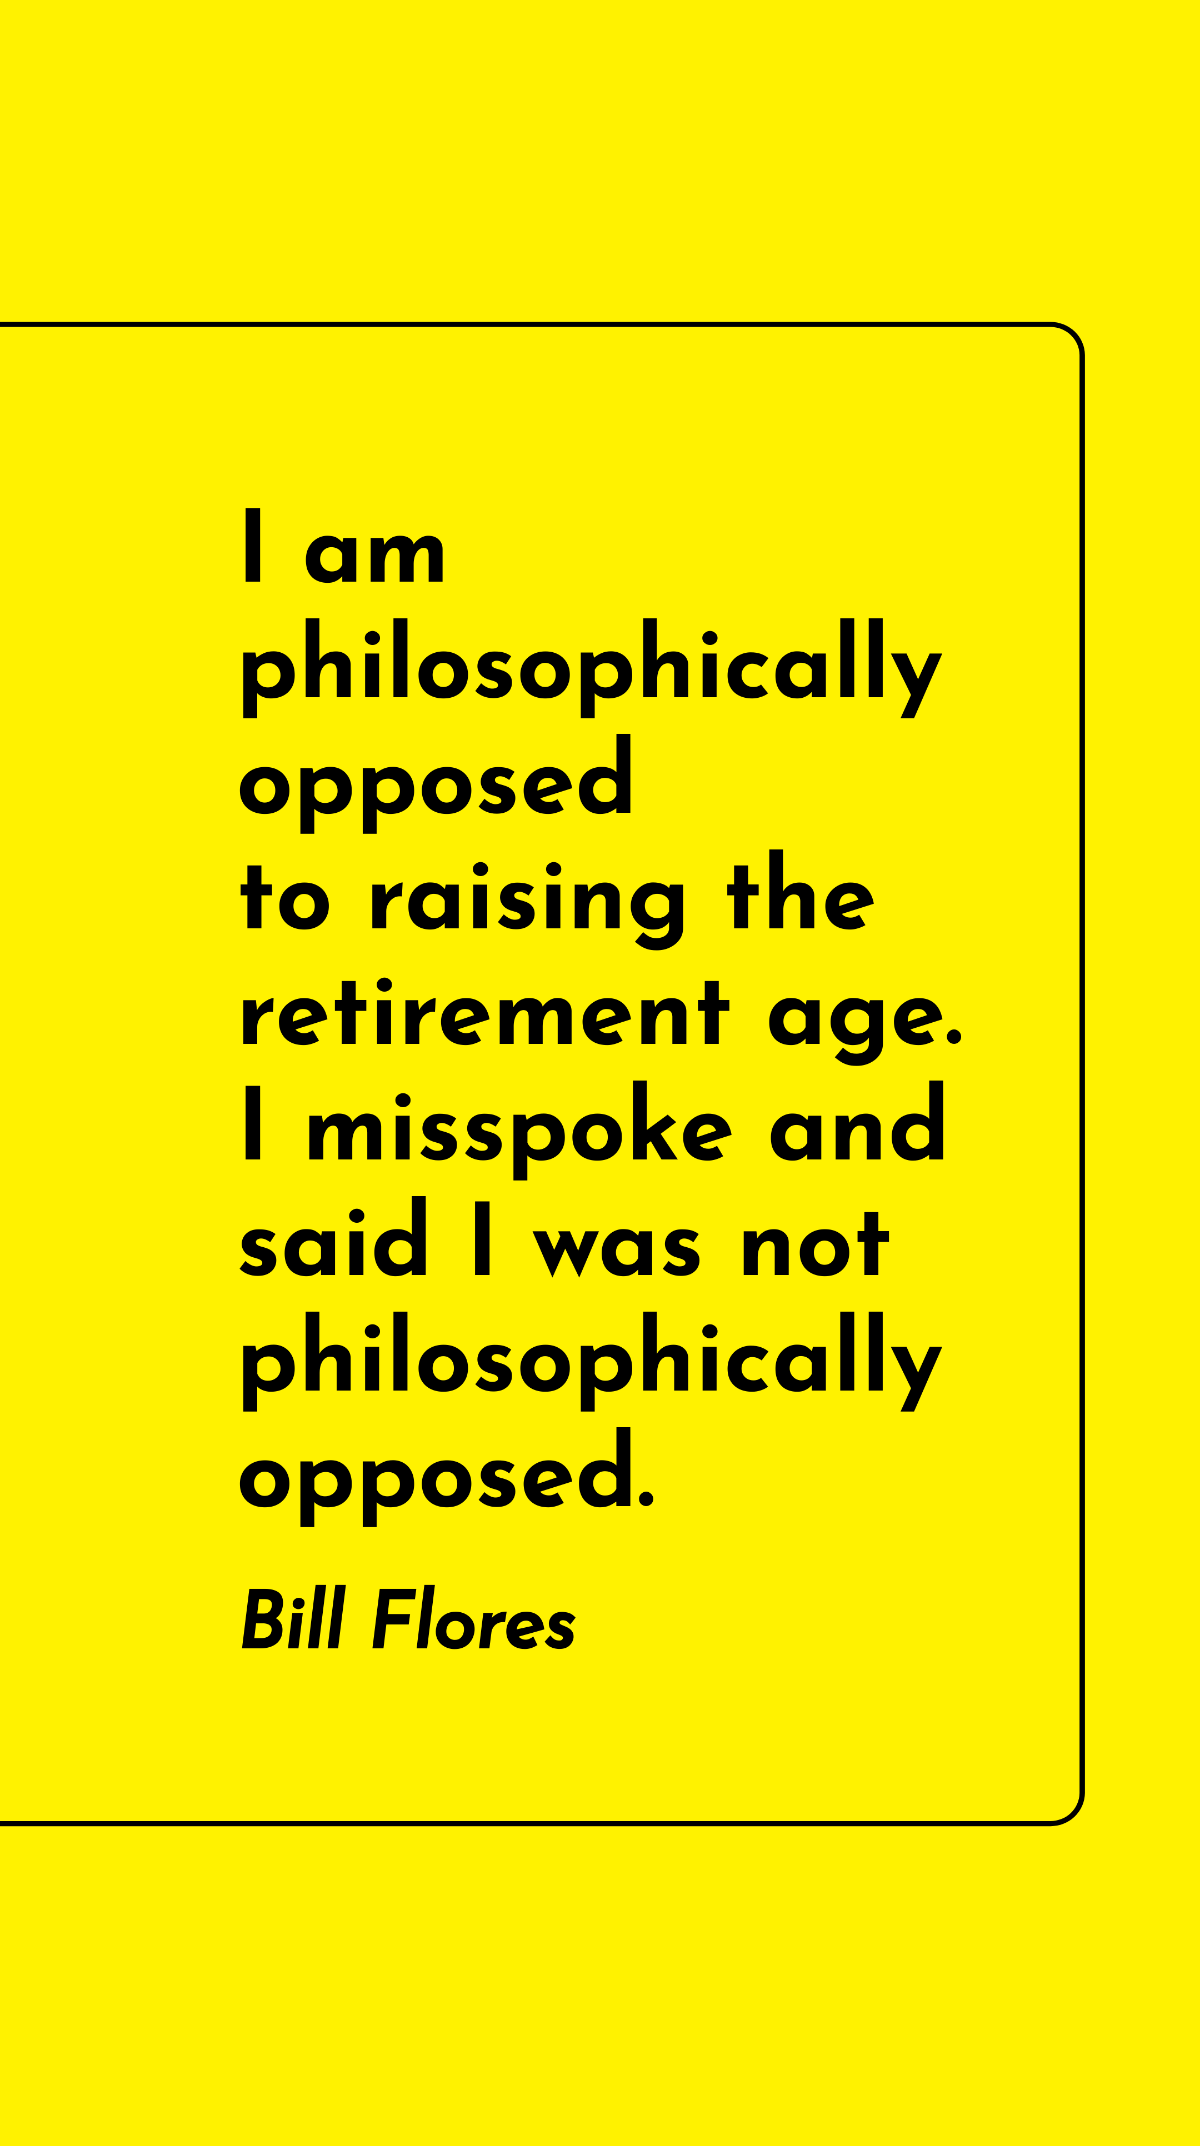 Free Bill Flores - I am philosophically opposed to raising the retirement age. I misspoke and said I was not philosophically opposed. Template